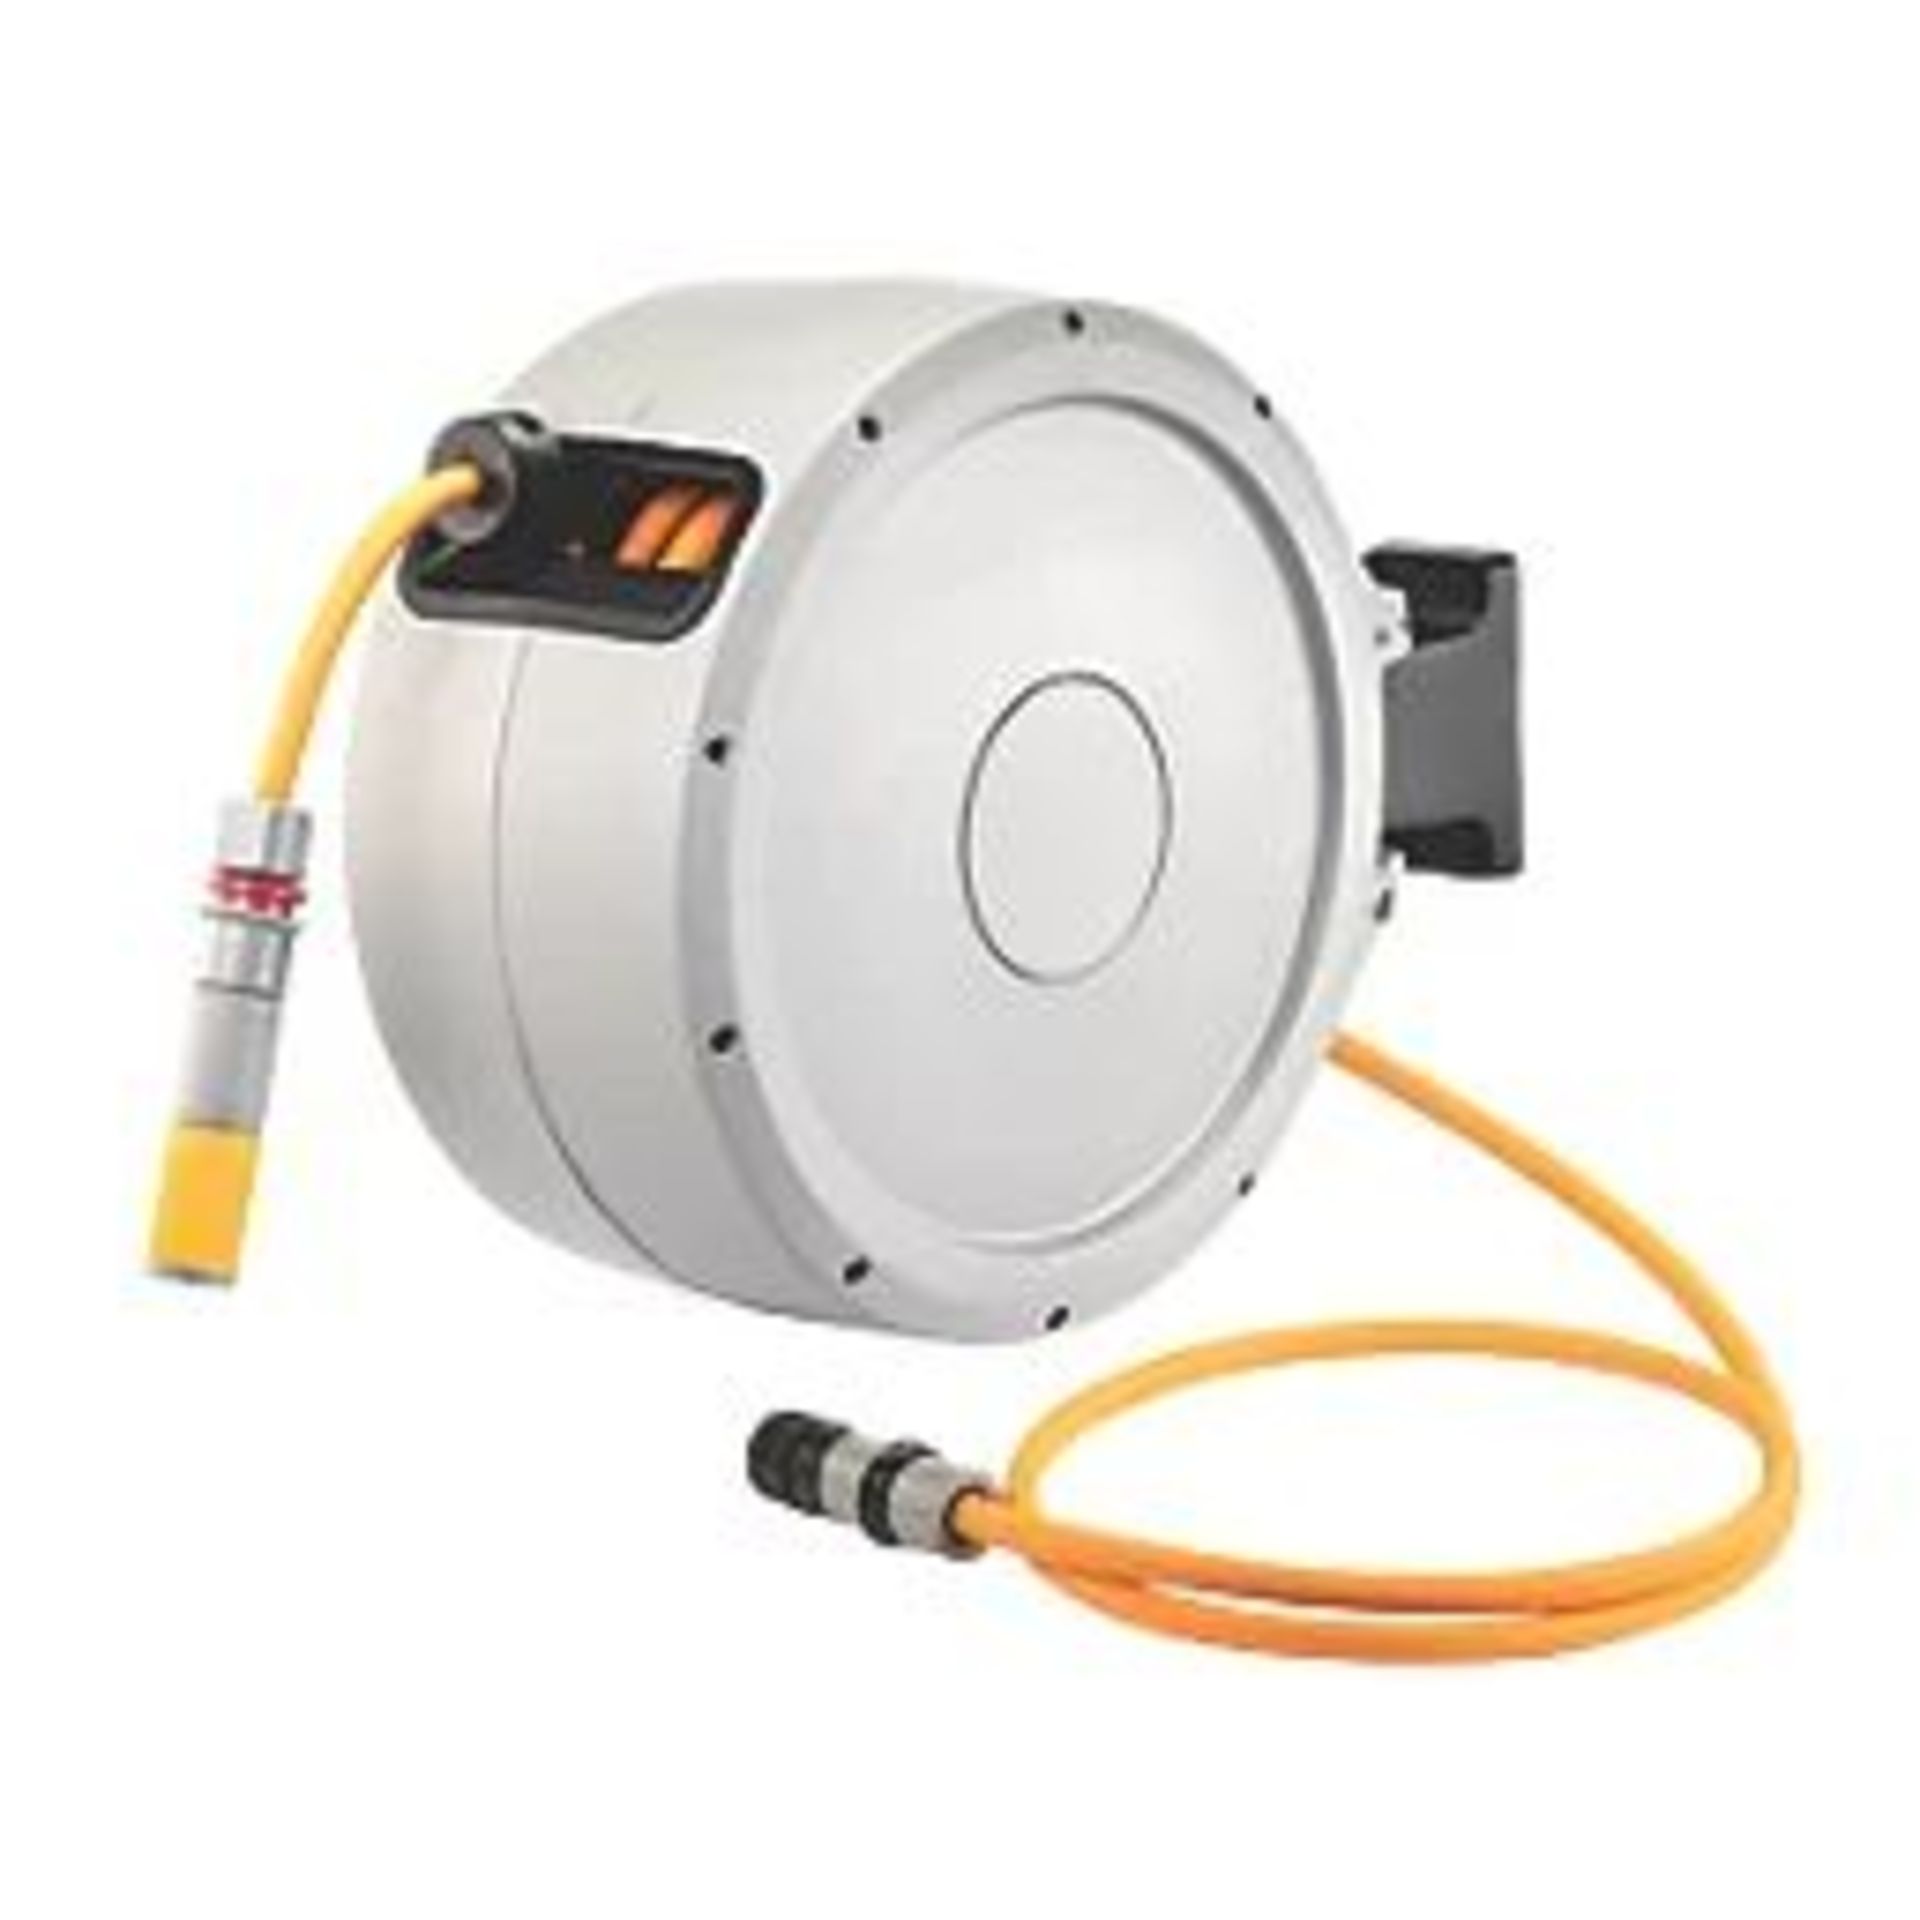 TITAN AUTO-REEL HOSE 11MM X 25M . - P5. Wall-mounted hose reel with an auto retract function and